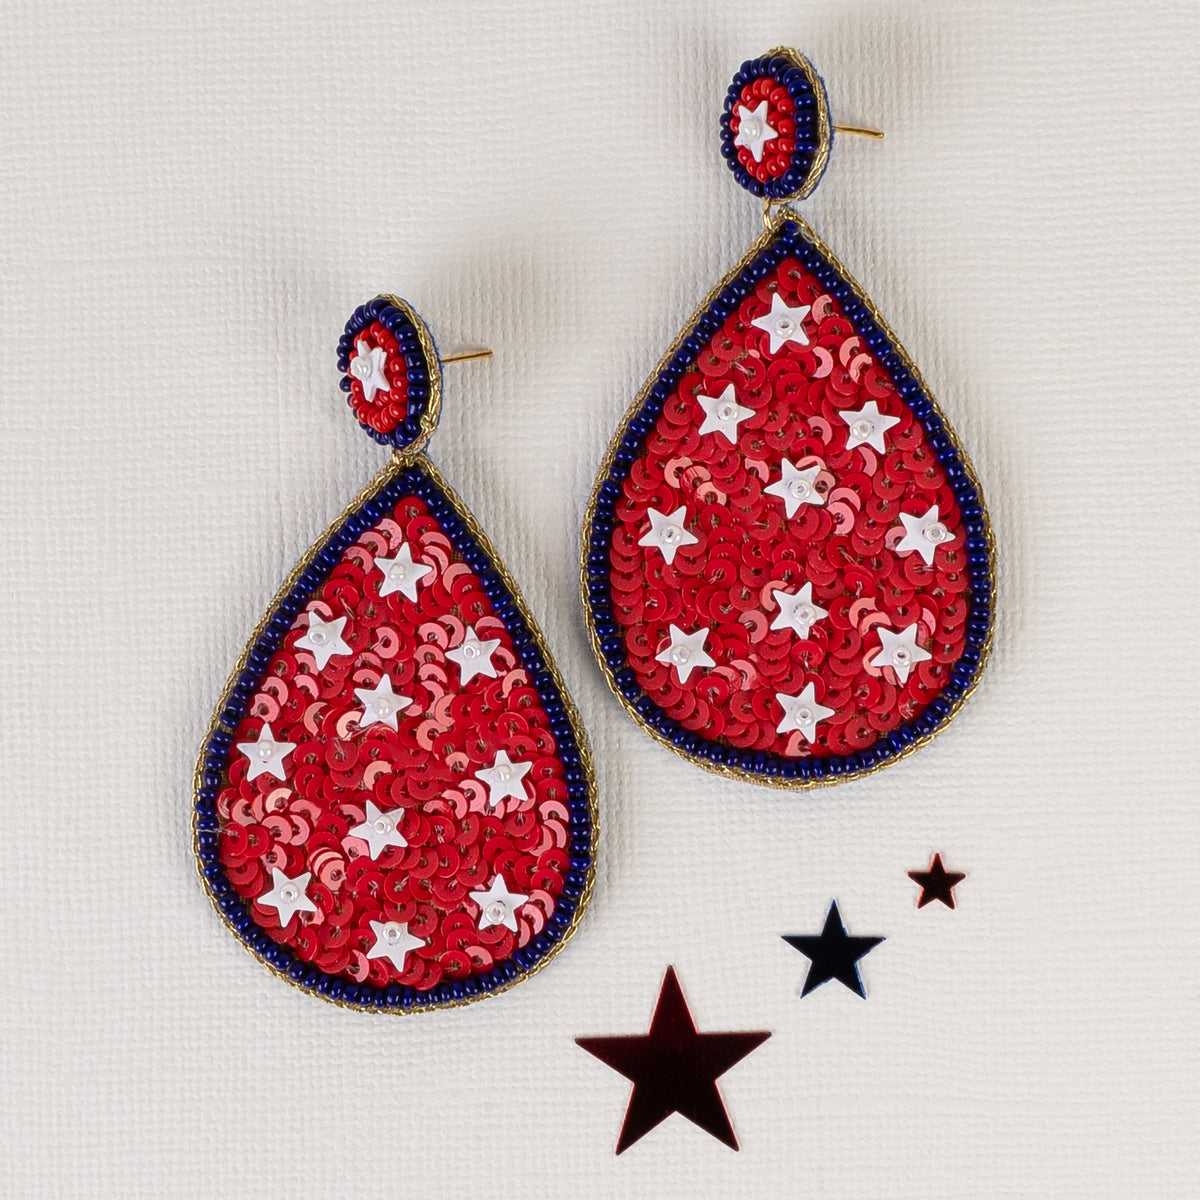 1539 - Fourth of July Earrings - Red, White, & Blue